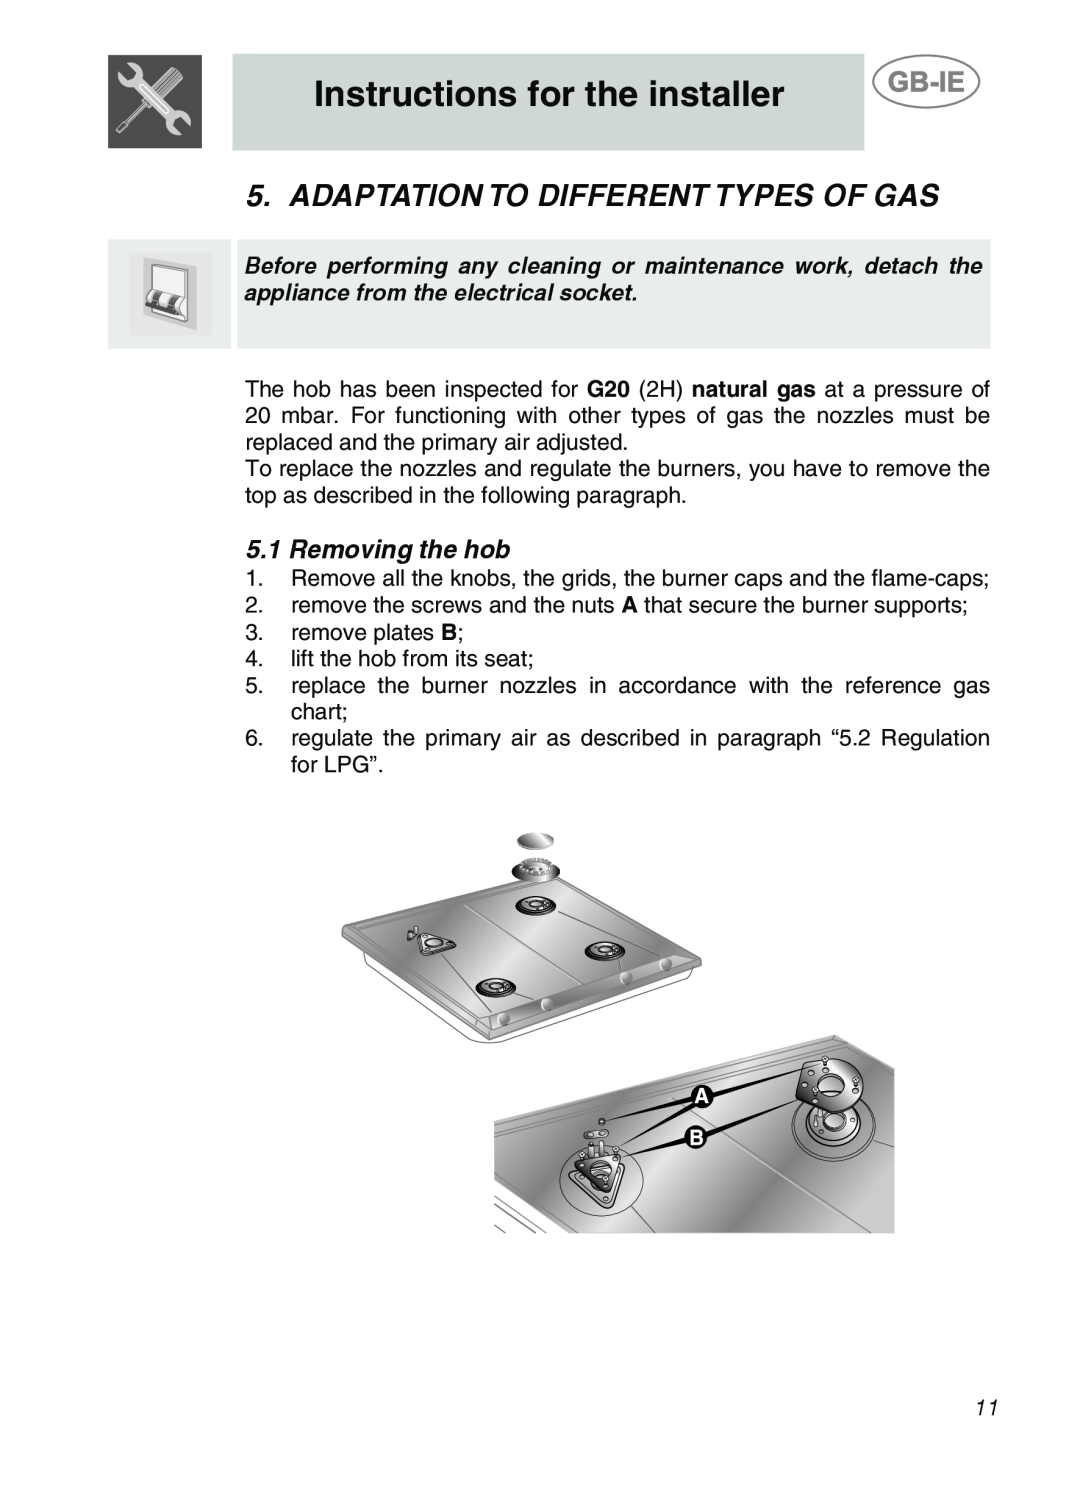 Smeg GCS90XG manual Adaptation To Different Types Of Gas, Removing the hob, Instructions for the installer 